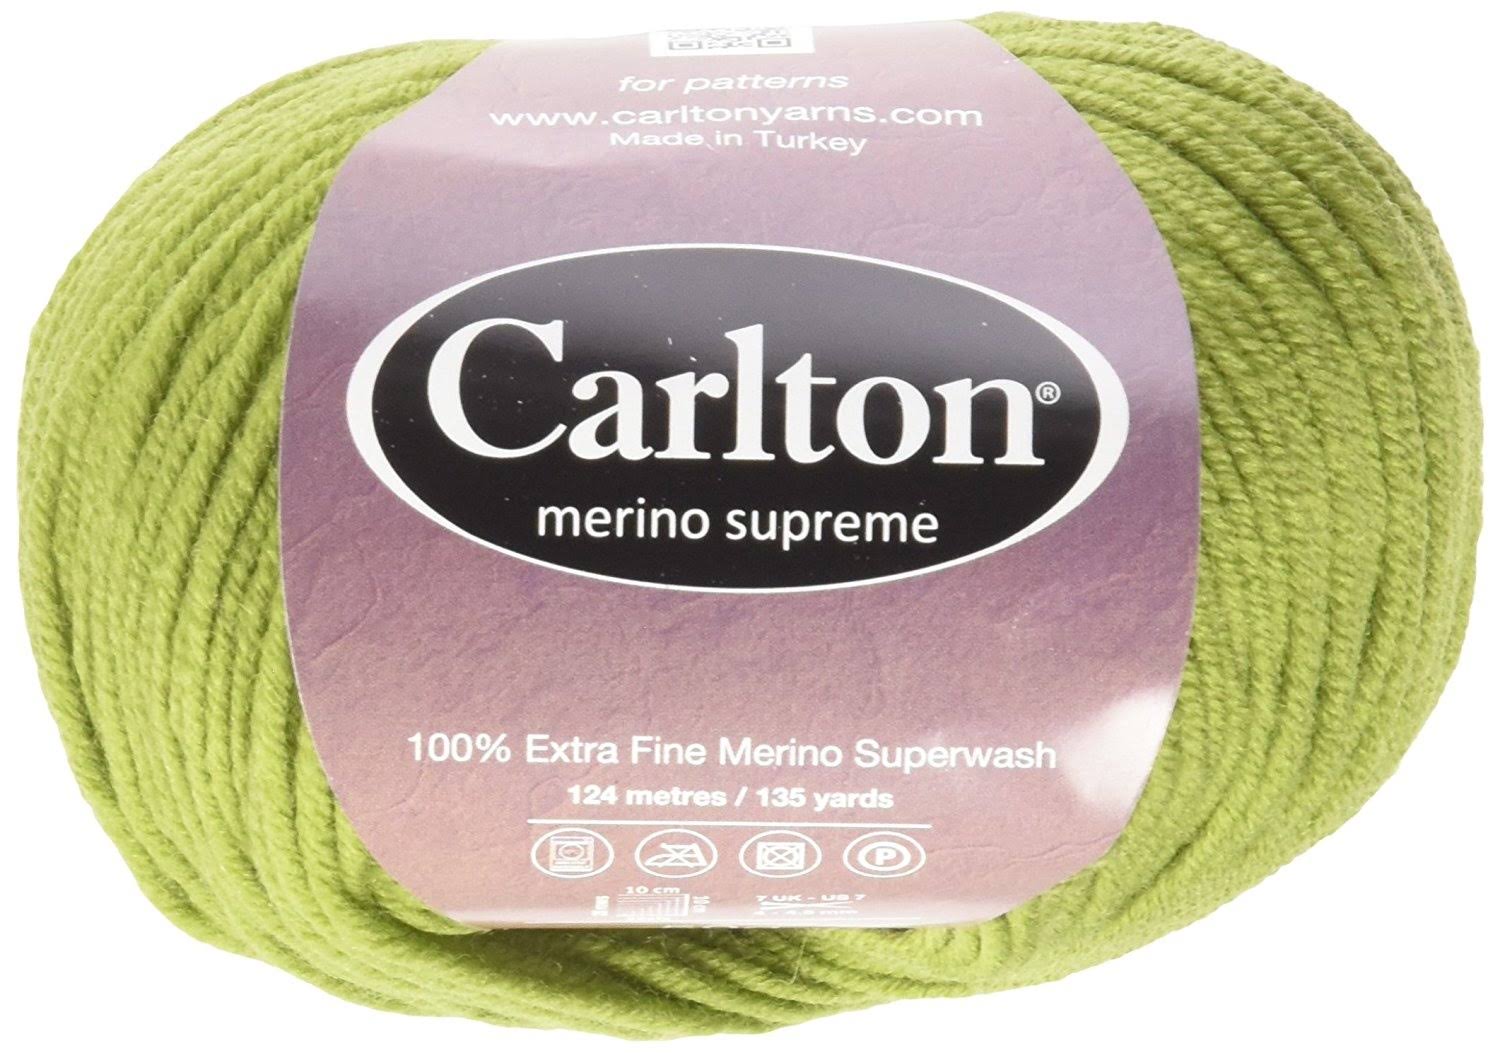 Carlton Yarns Merino Supreme, Pistachio | General | Free Shipping On All Orders | Best Price Guarantee | Delivery Guaranteed